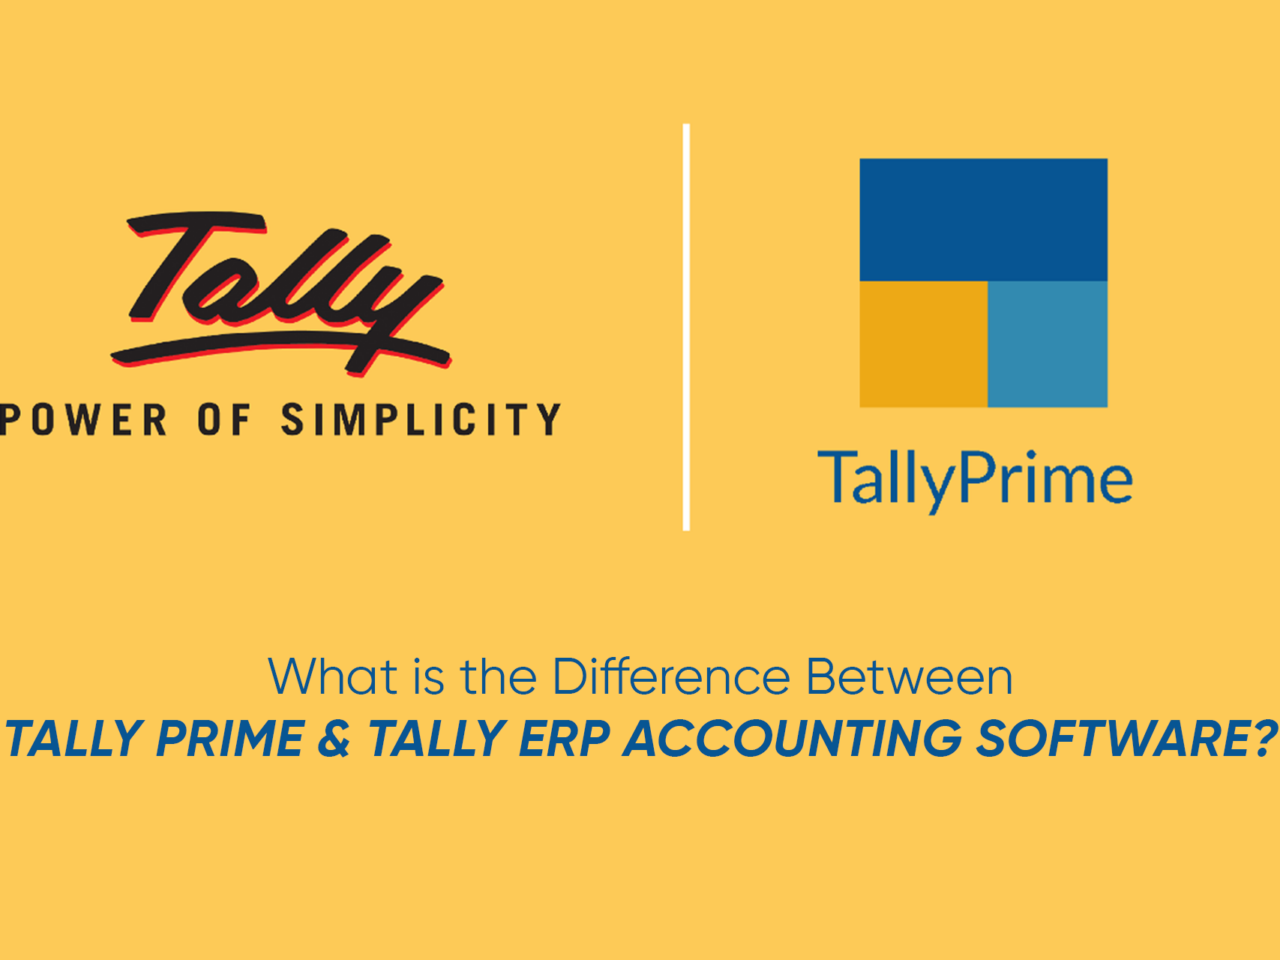 What is the Difference Between Tally Prime & Tally ERP Accounting Software?